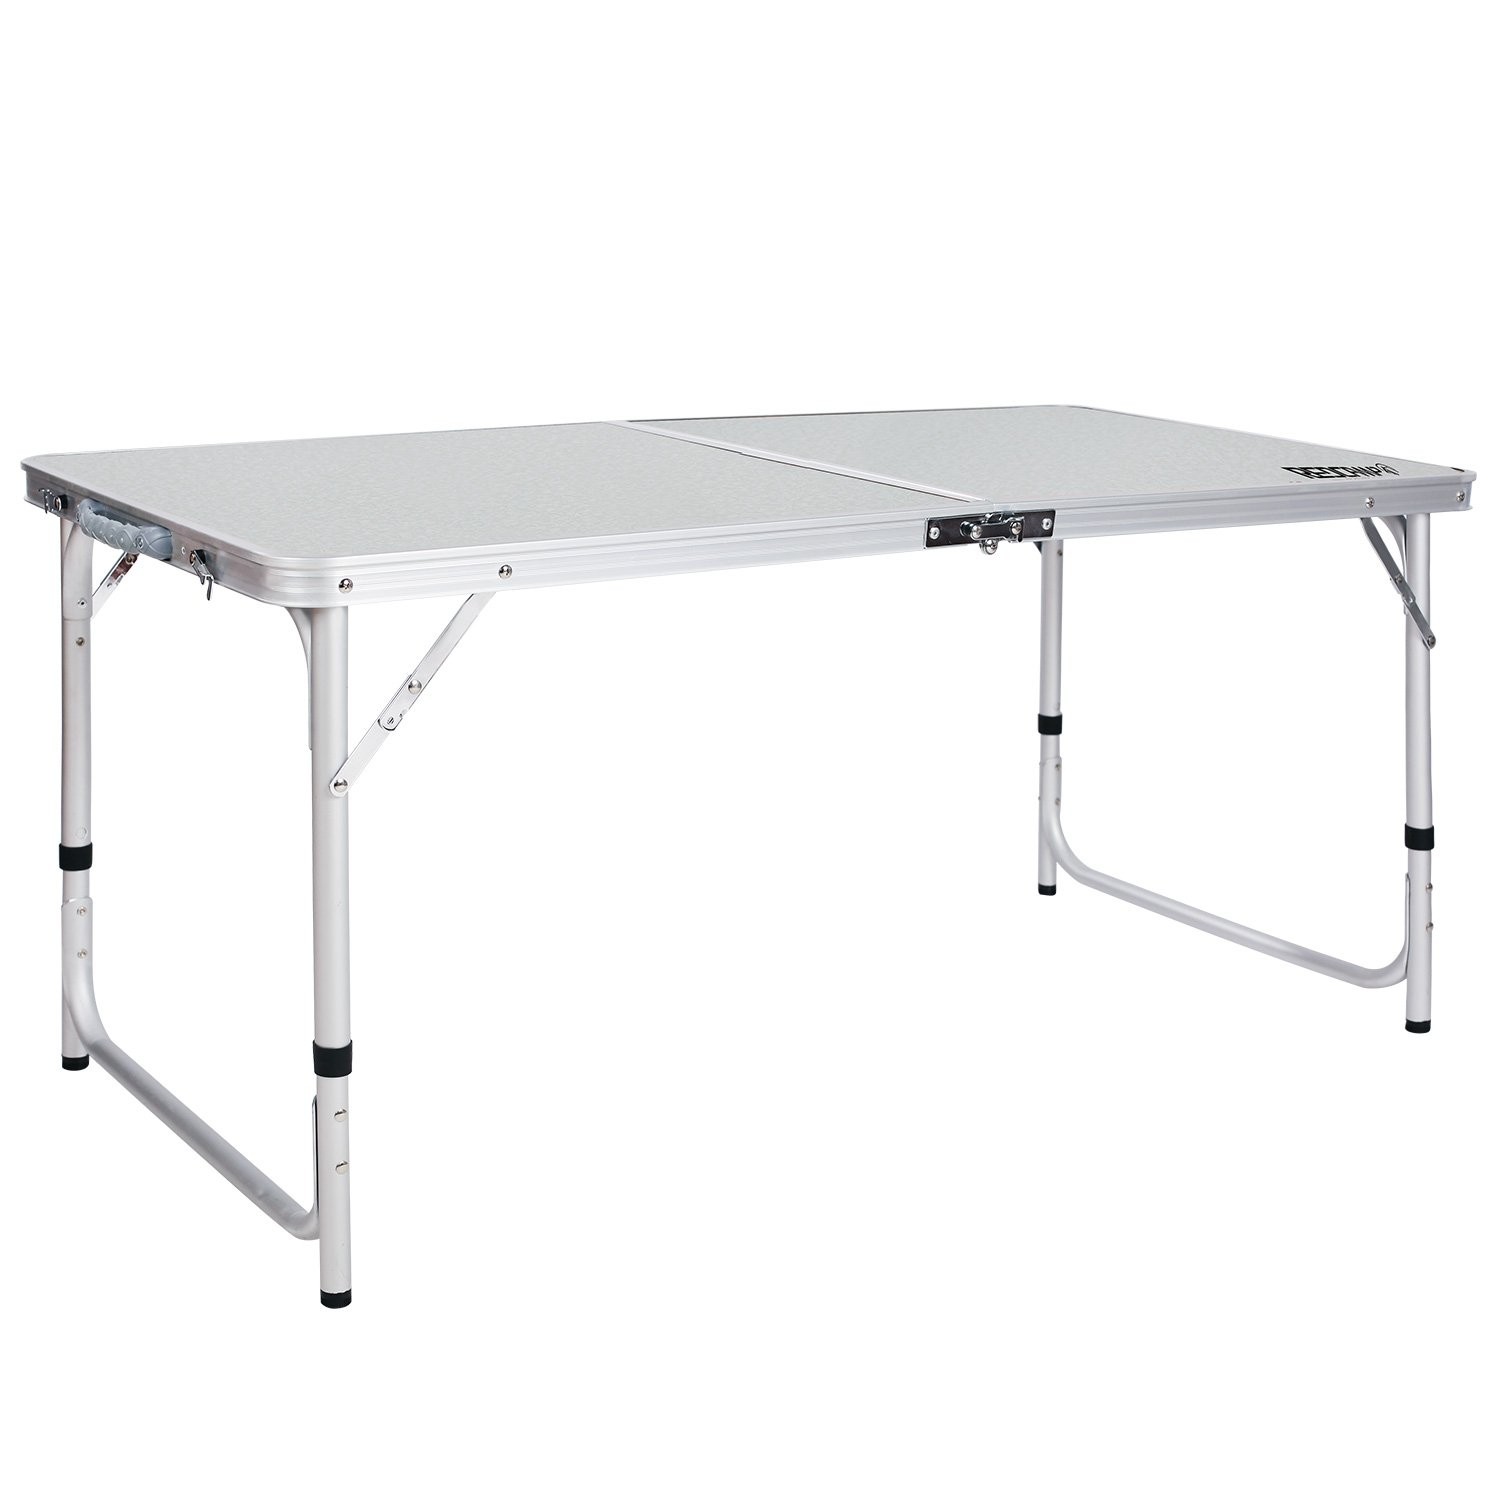 Redcamp aluminum folding table 4 foot portable and